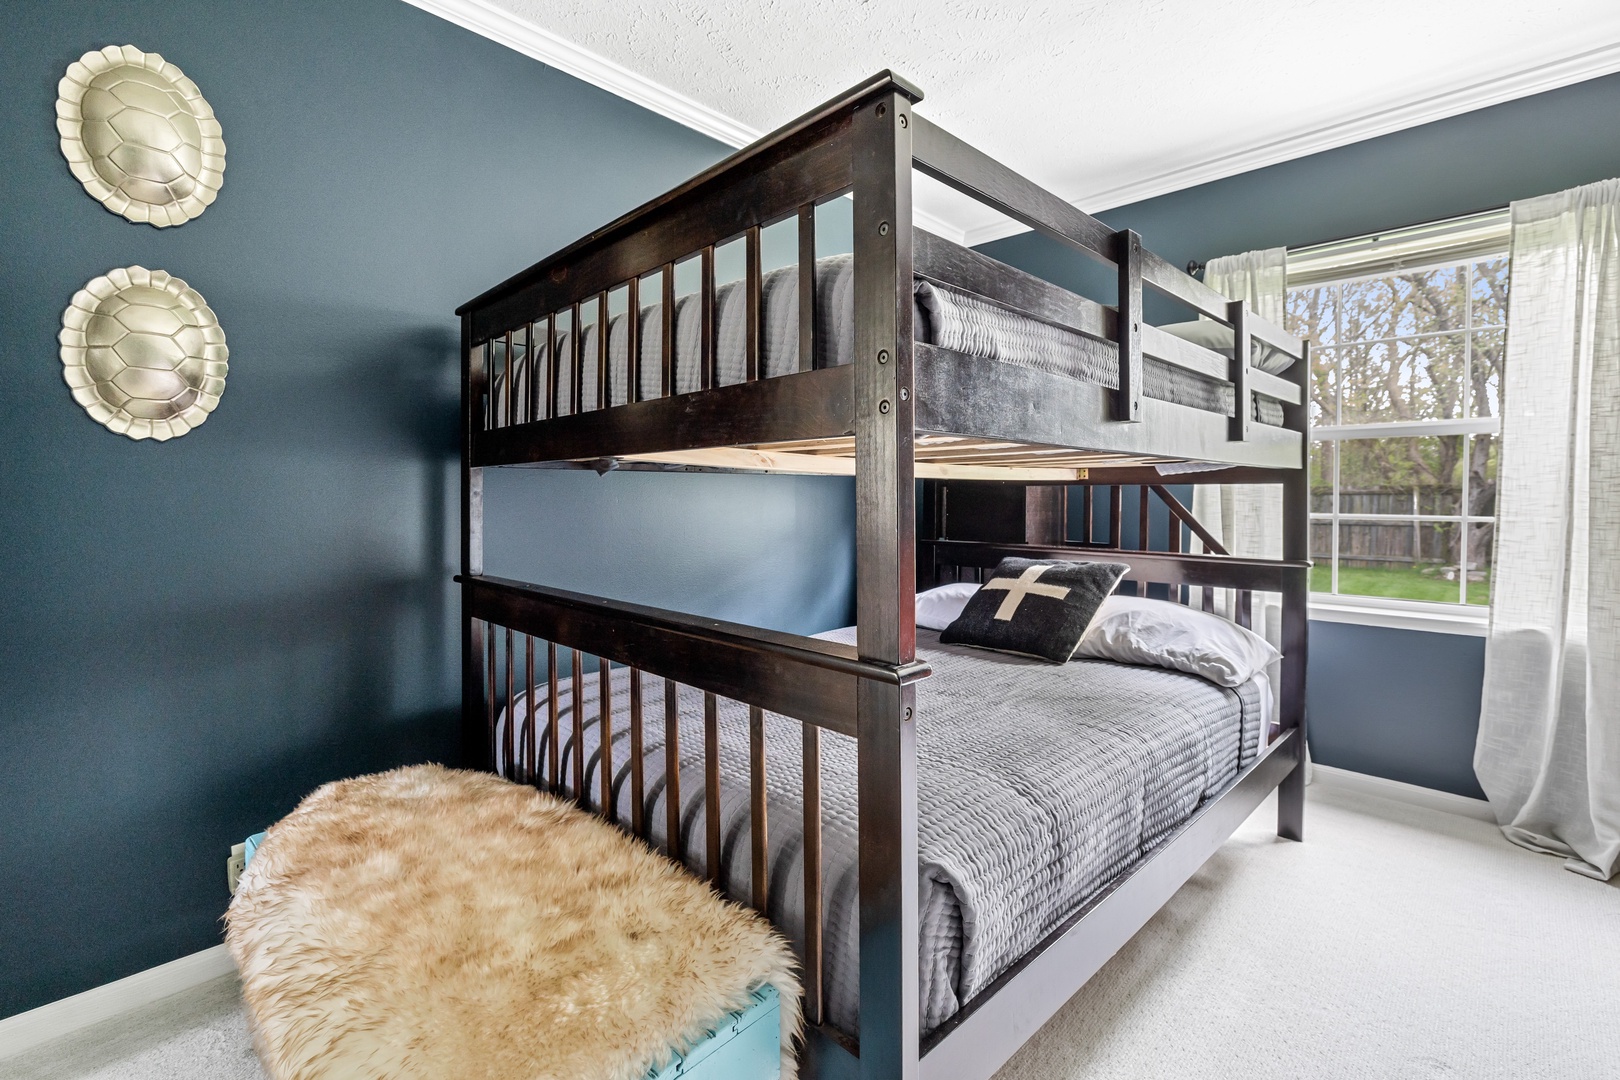 Fun and cozy, this bunk room is perfect for kids and adults alike.